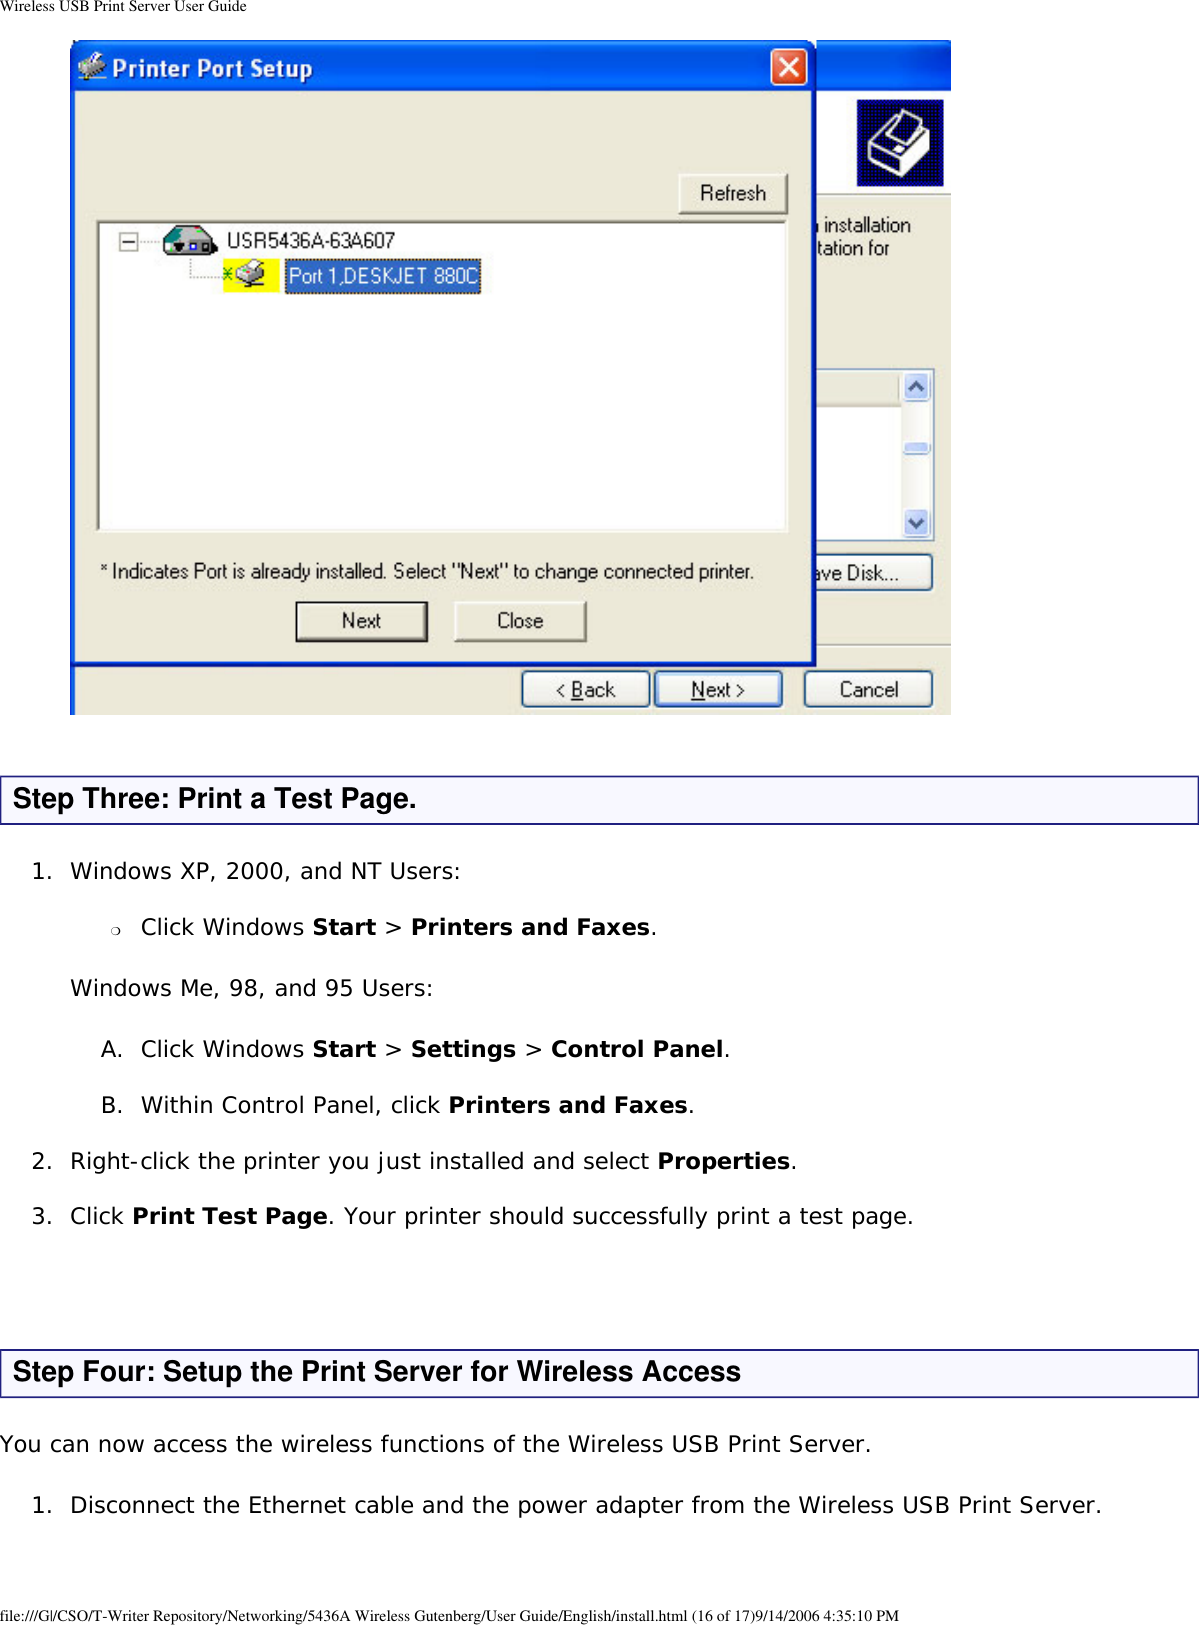 Wireless USB Print Server User Guide  Step Three: Print a Test Page. 1.  Windows XP, 2000, and NT Users: ❍     Click Windows Start &gt; Printers and Faxes. Windows Me, 98, and 95 Users:A.  Click Windows Start &gt; Settings &gt; Control Panel. B.  Within Control Panel, click Printers and Faxes. 2.  Right-click the printer you just installed and select Properties. 3.  Click Print Test Page. Your printer should successfully print a test page.  Step Four: Setup the Print Server for Wireless Access You can now access the wireless functions of the Wireless USB Print Server.1.  Disconnect the Ethernet cable and the power adapter from the Wireless USB Print Server. file:///G|/CSO/T-Writer Repository/Networking/5436A Wireless Gutenberg/User Guide/English/install.html (16 of 17)9/14/2006 4:35:10 PM